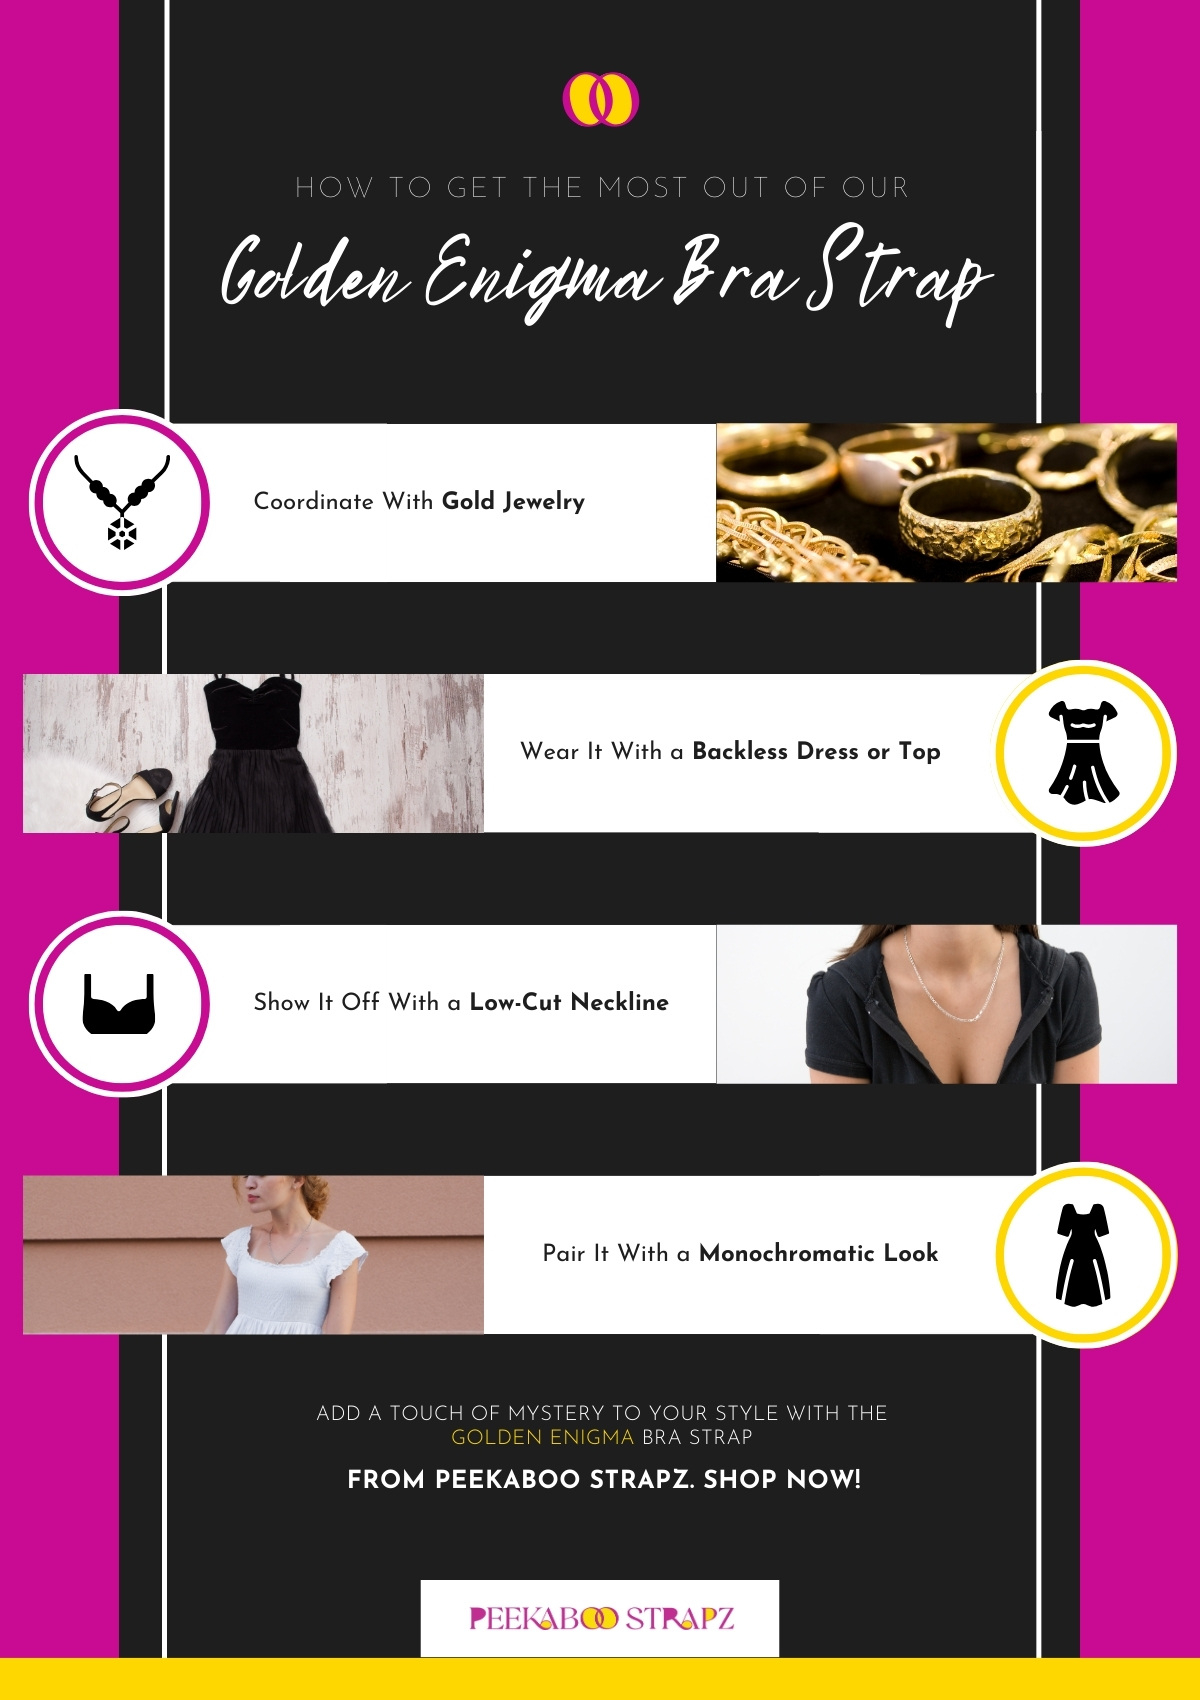 M38393 - Infographic - Golden Enigma - How to Get the Most Out of Our Glittering Gold Bra Strap.jpg